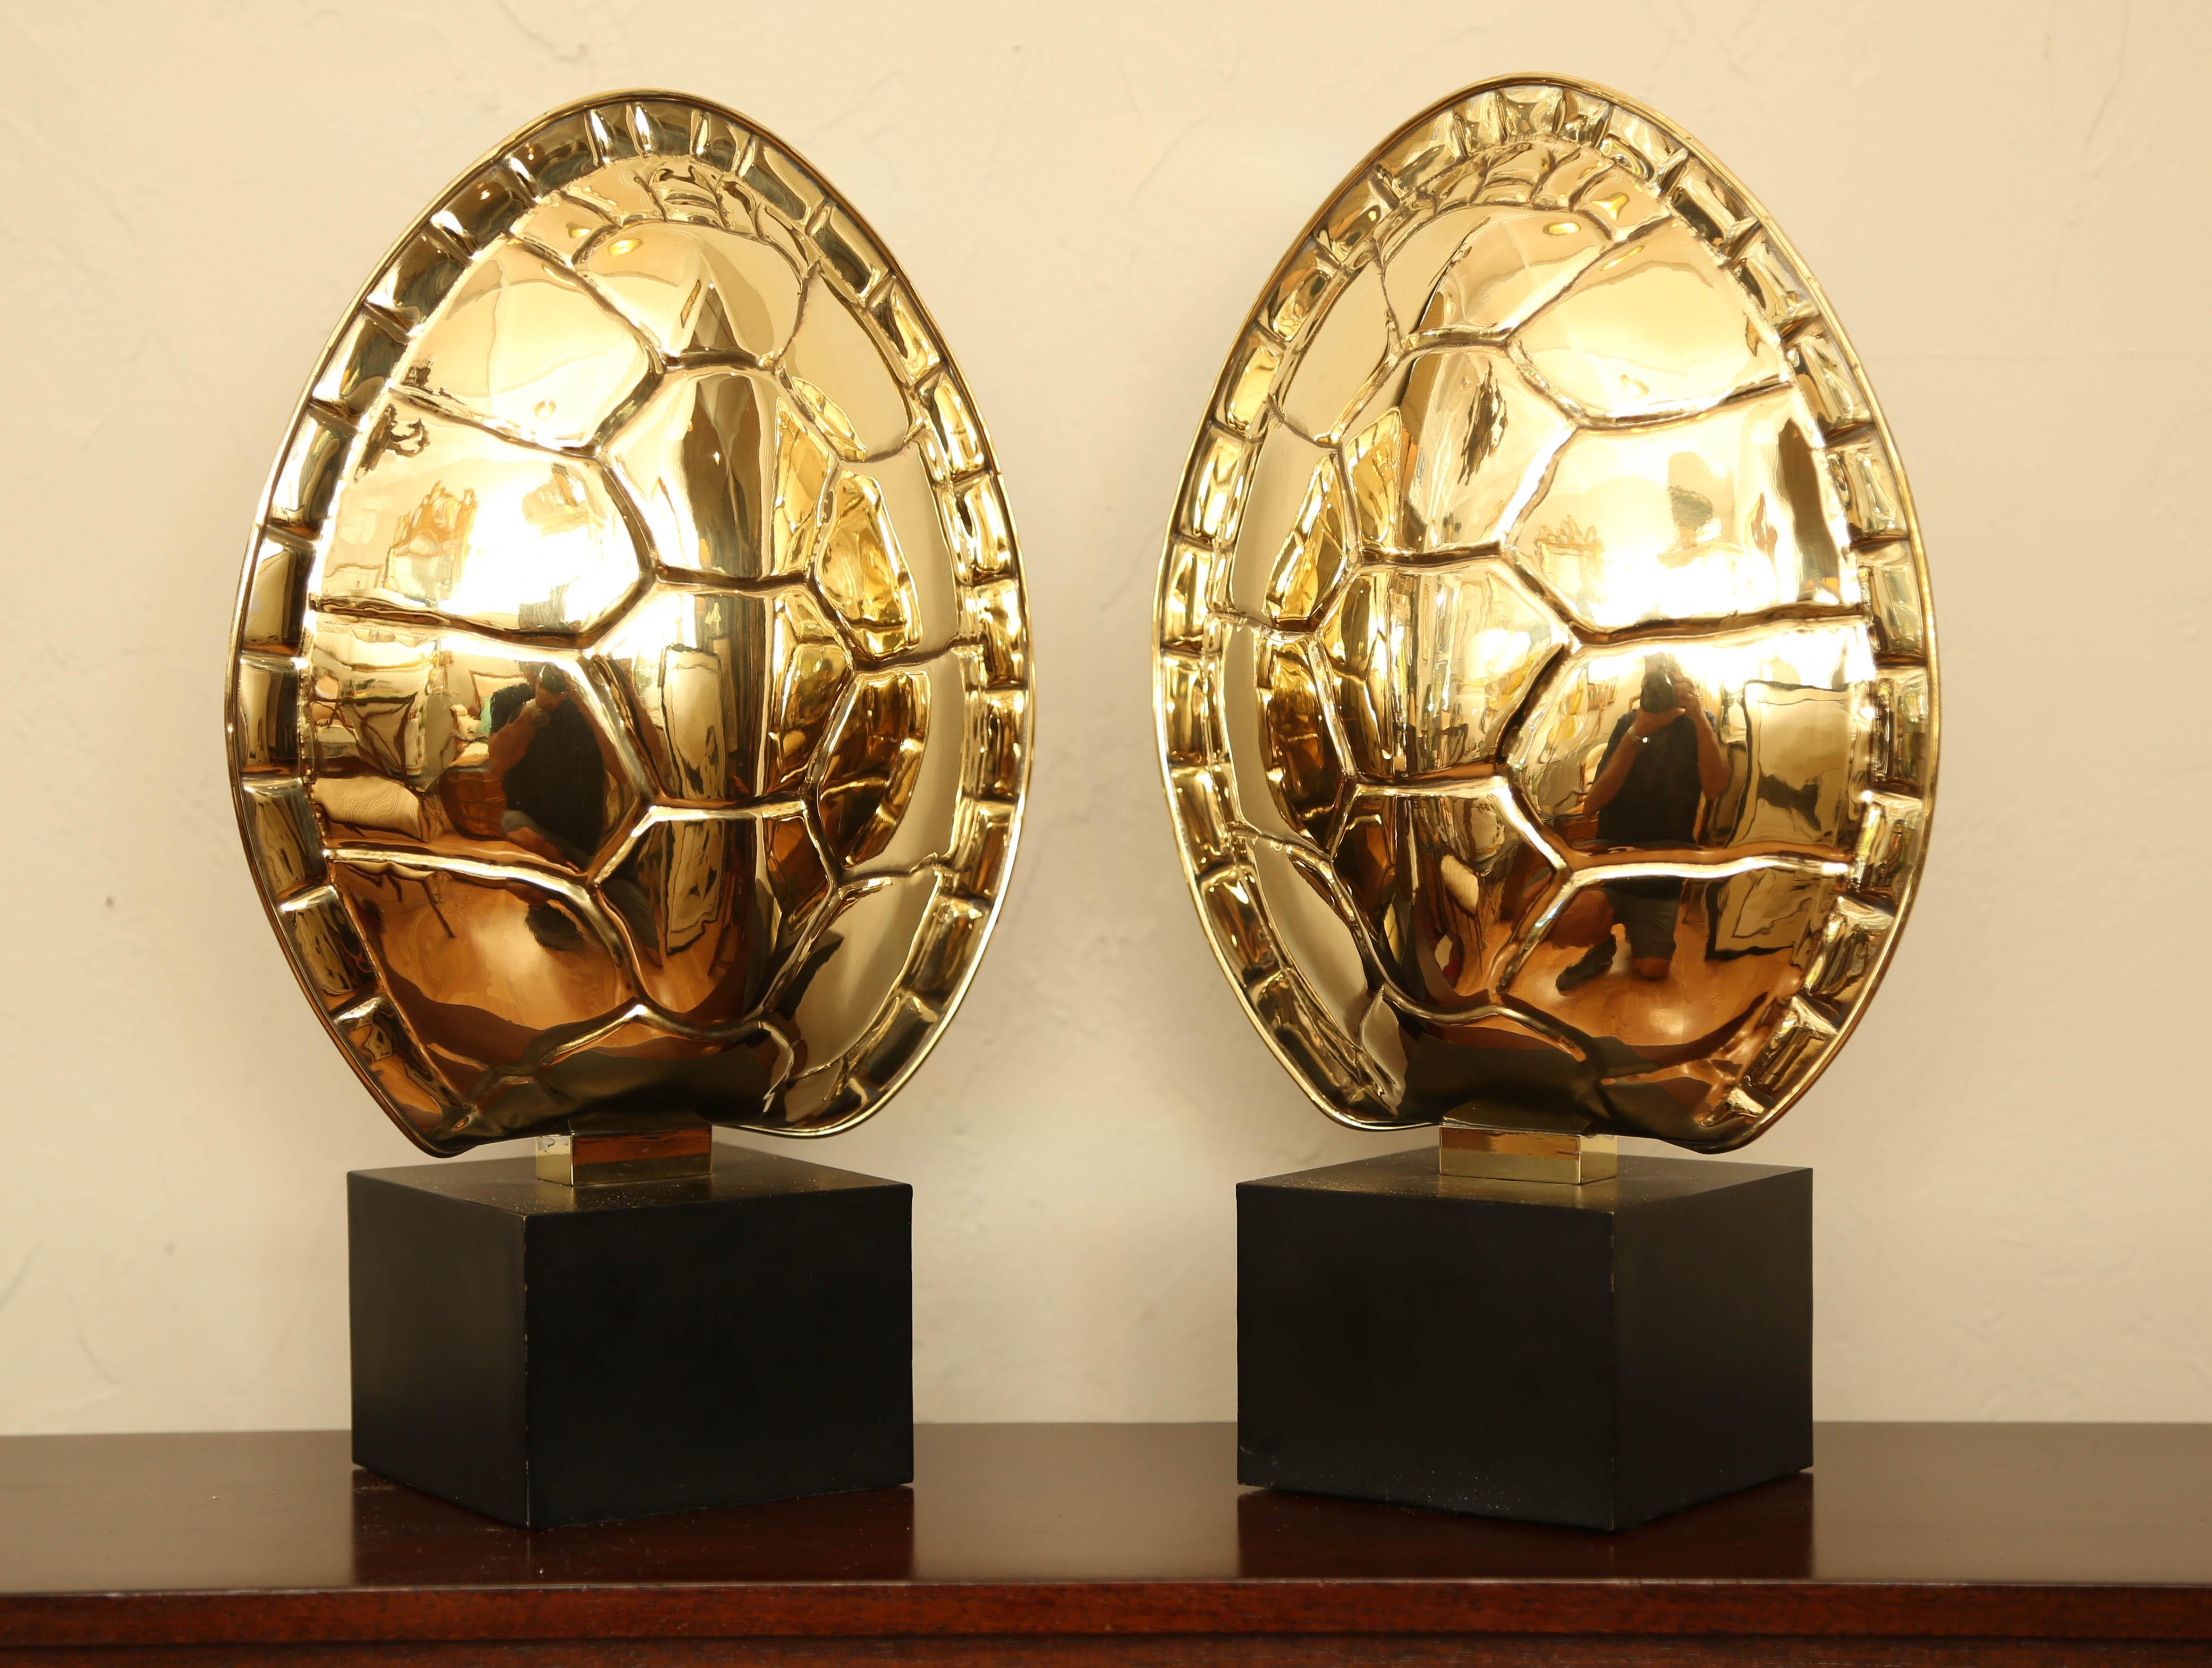 Pair of Chapman polished brass tortoise shell lamps.